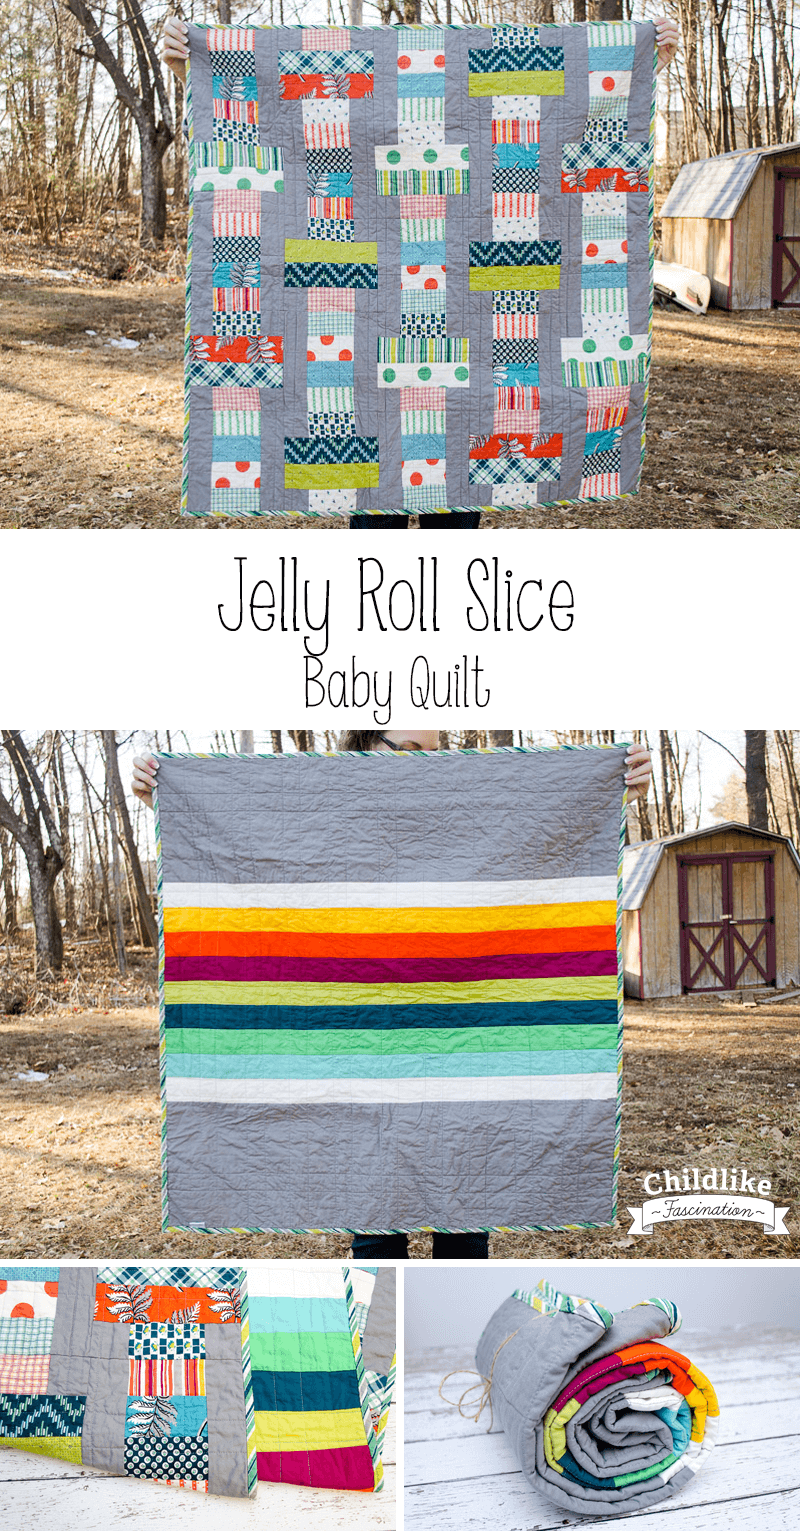 Jelly Roll Slice a free pattern from the Fat Quarter Shop